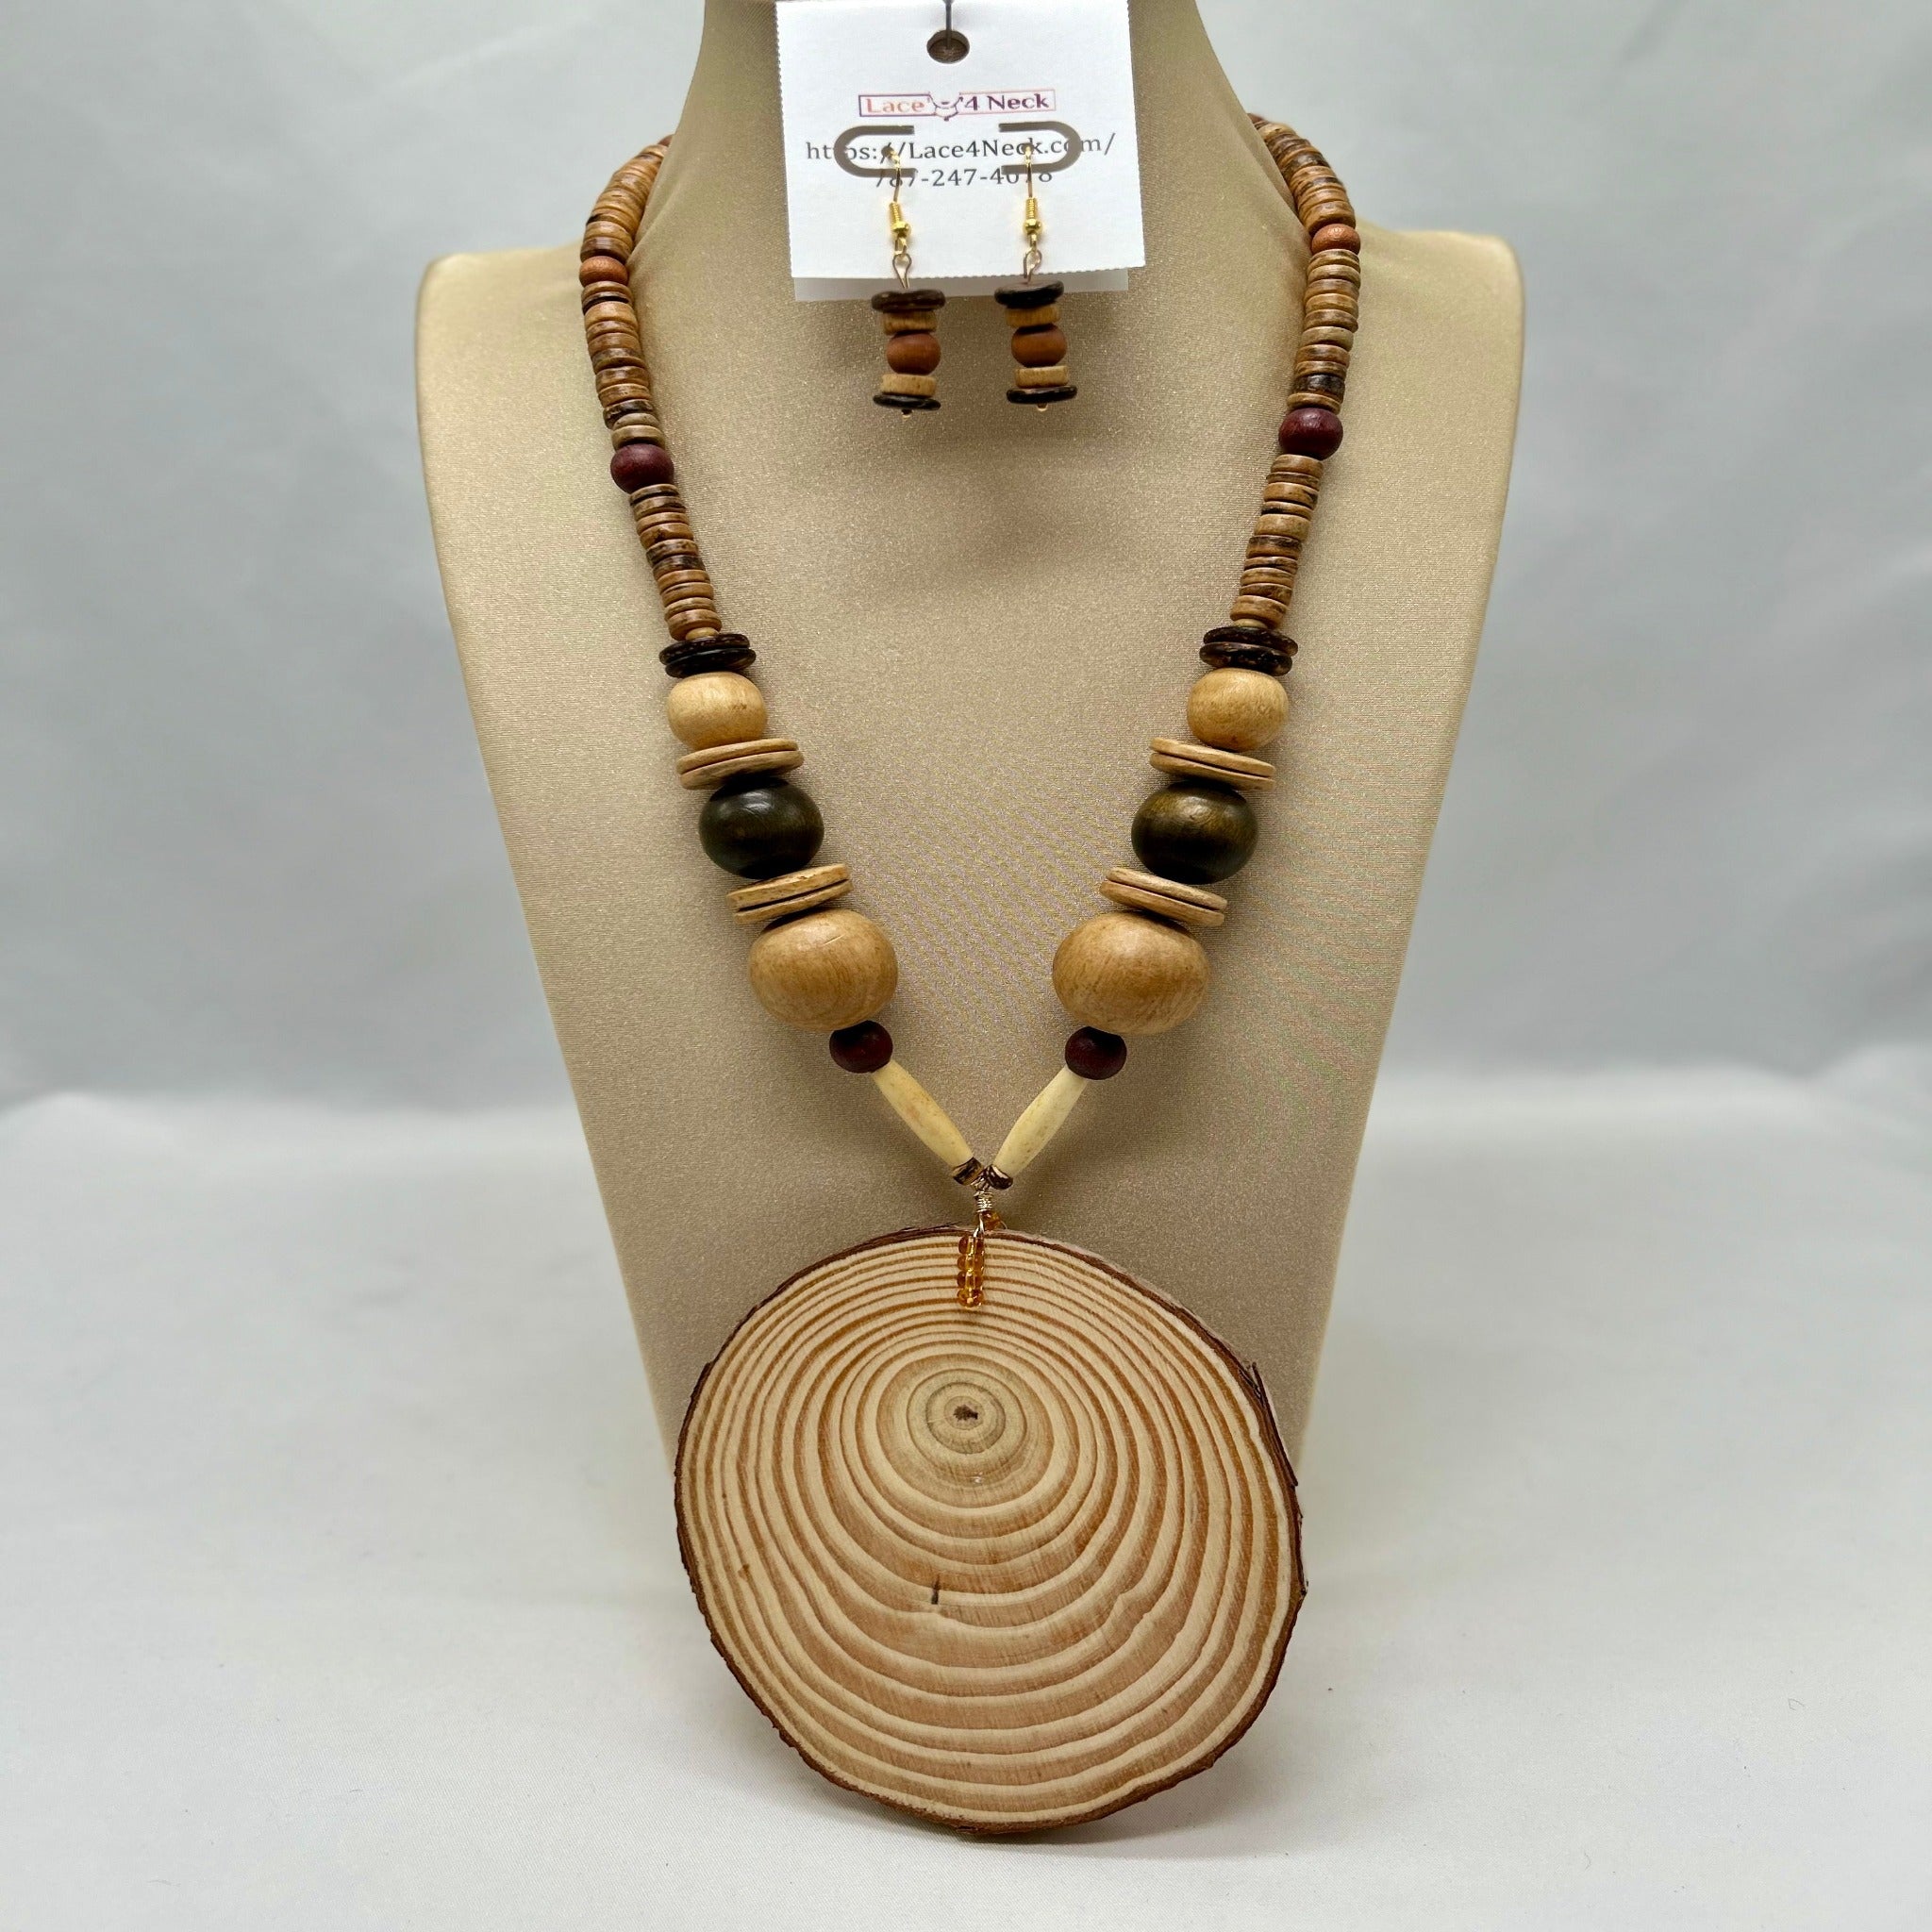 "Inel", wood & coconut shell beads